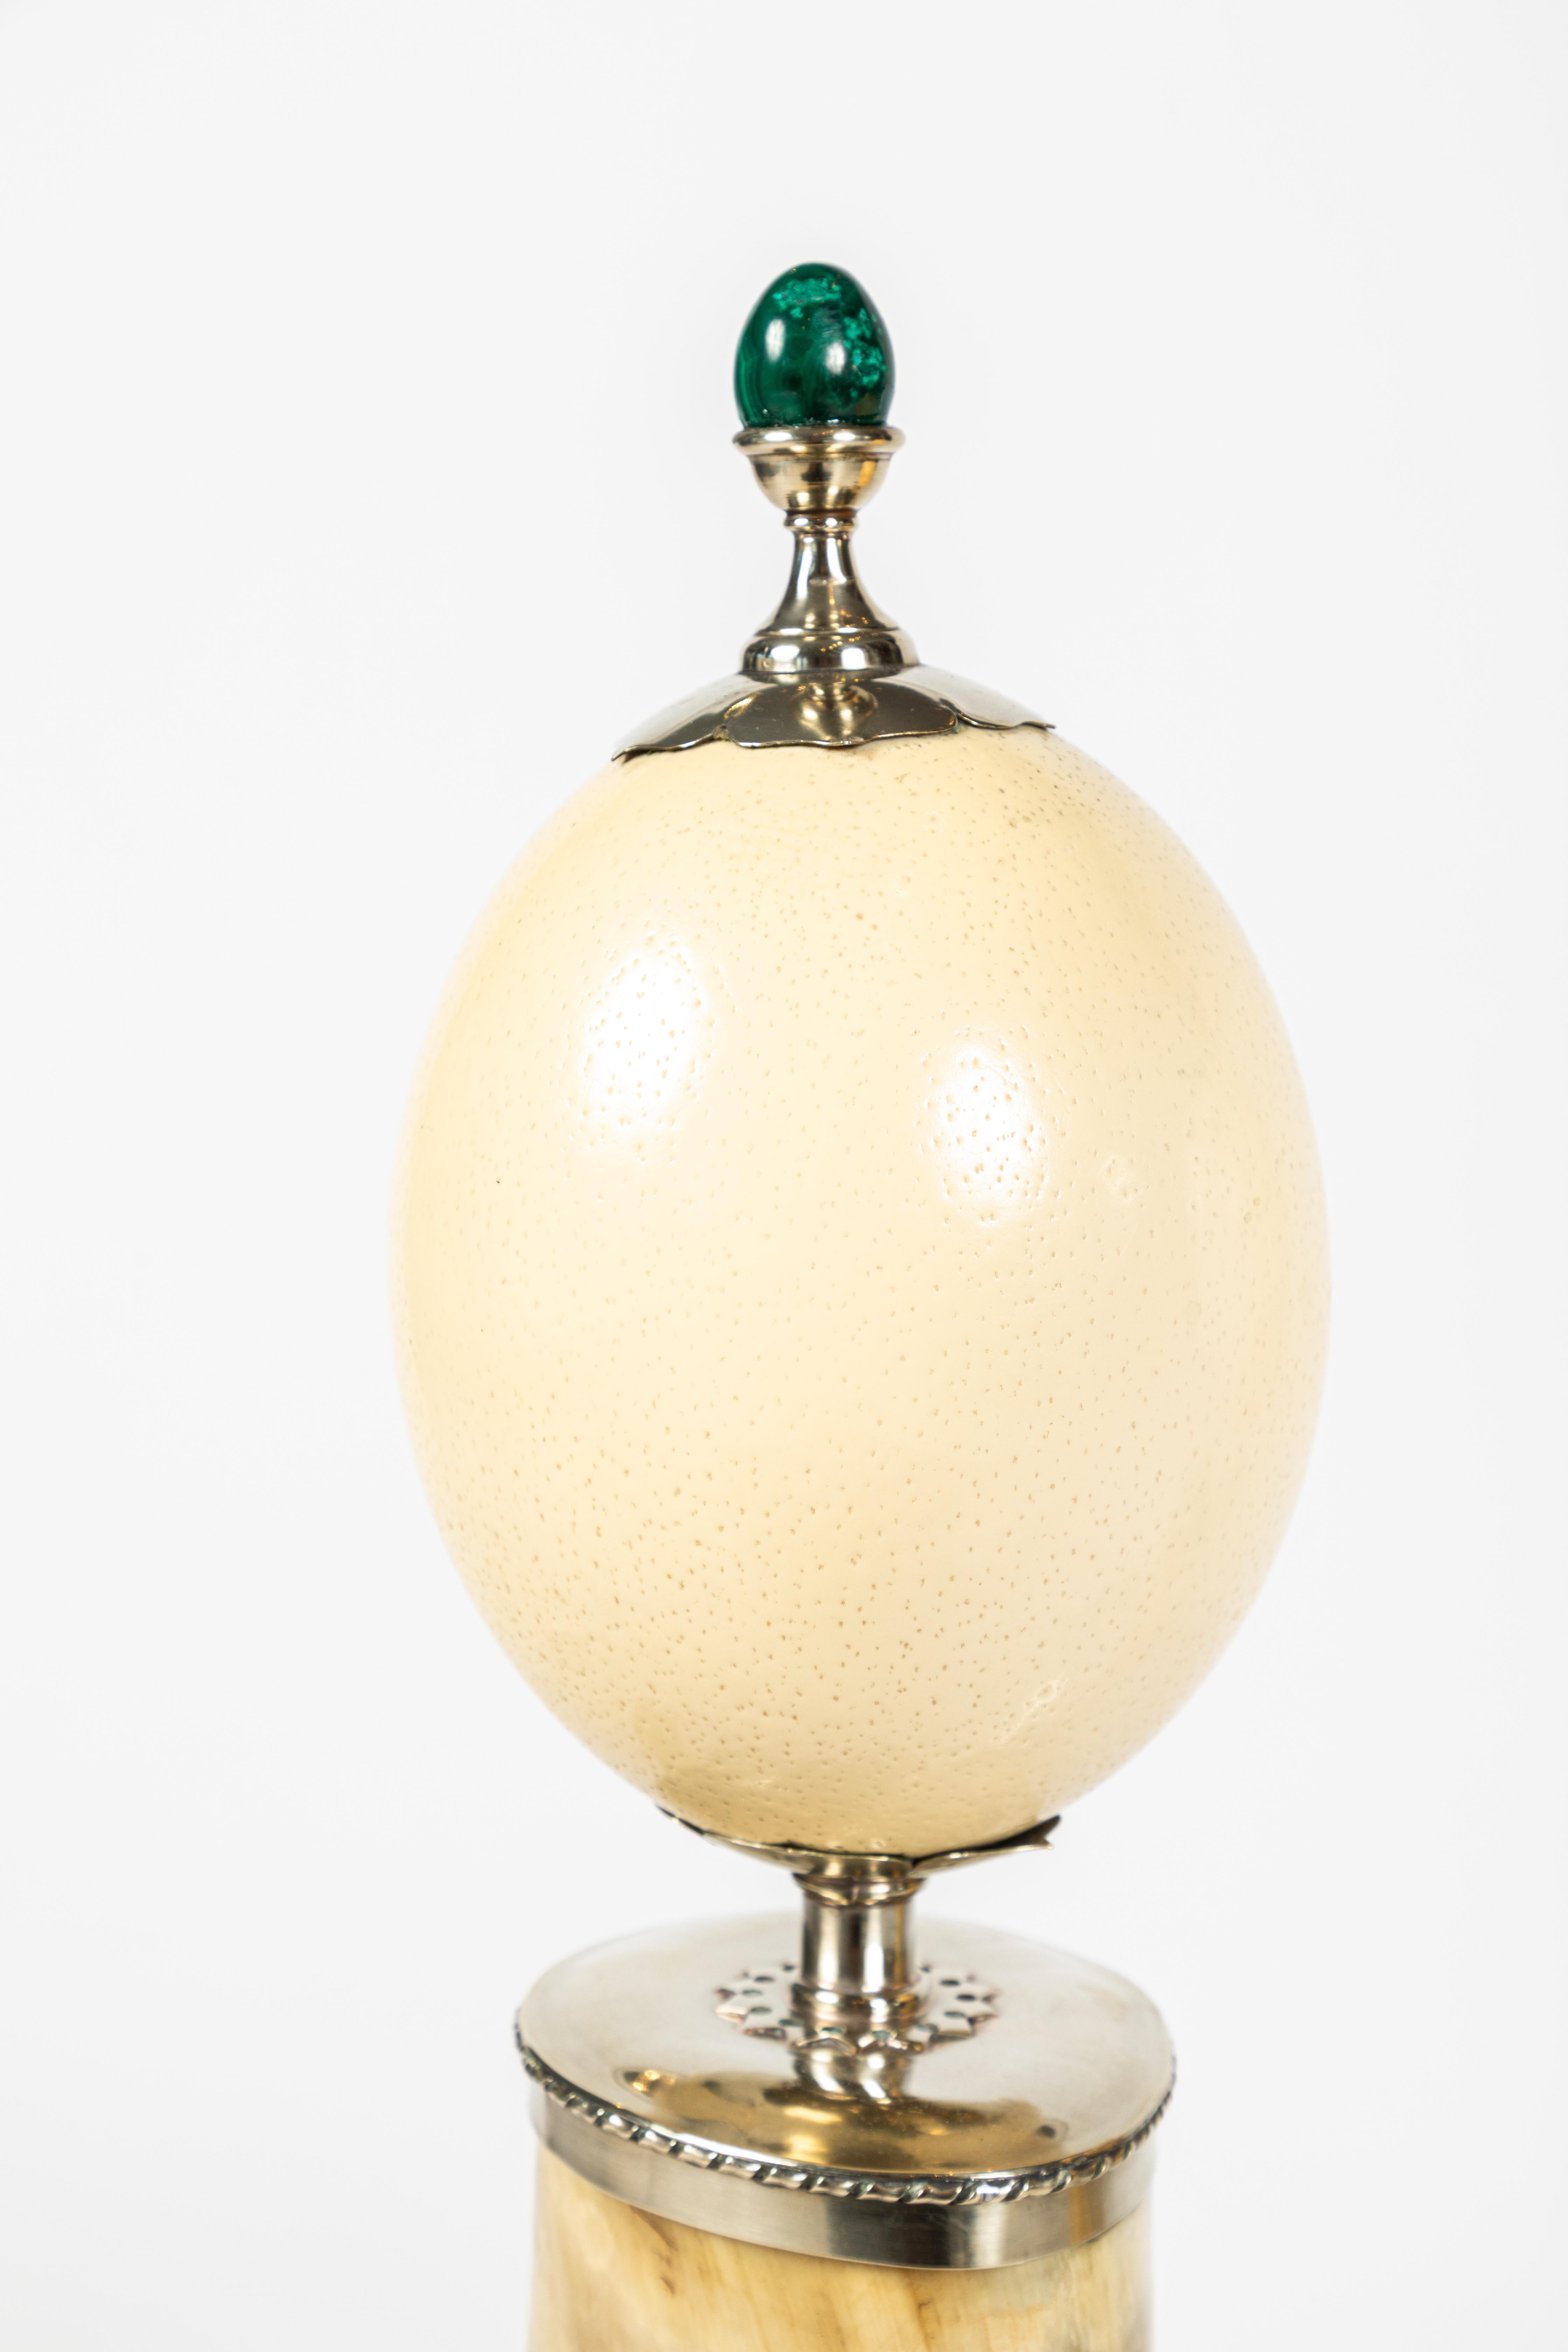 English Pair of Decorative Horn and Ostrich Egg Garnitures by Antony Redmile